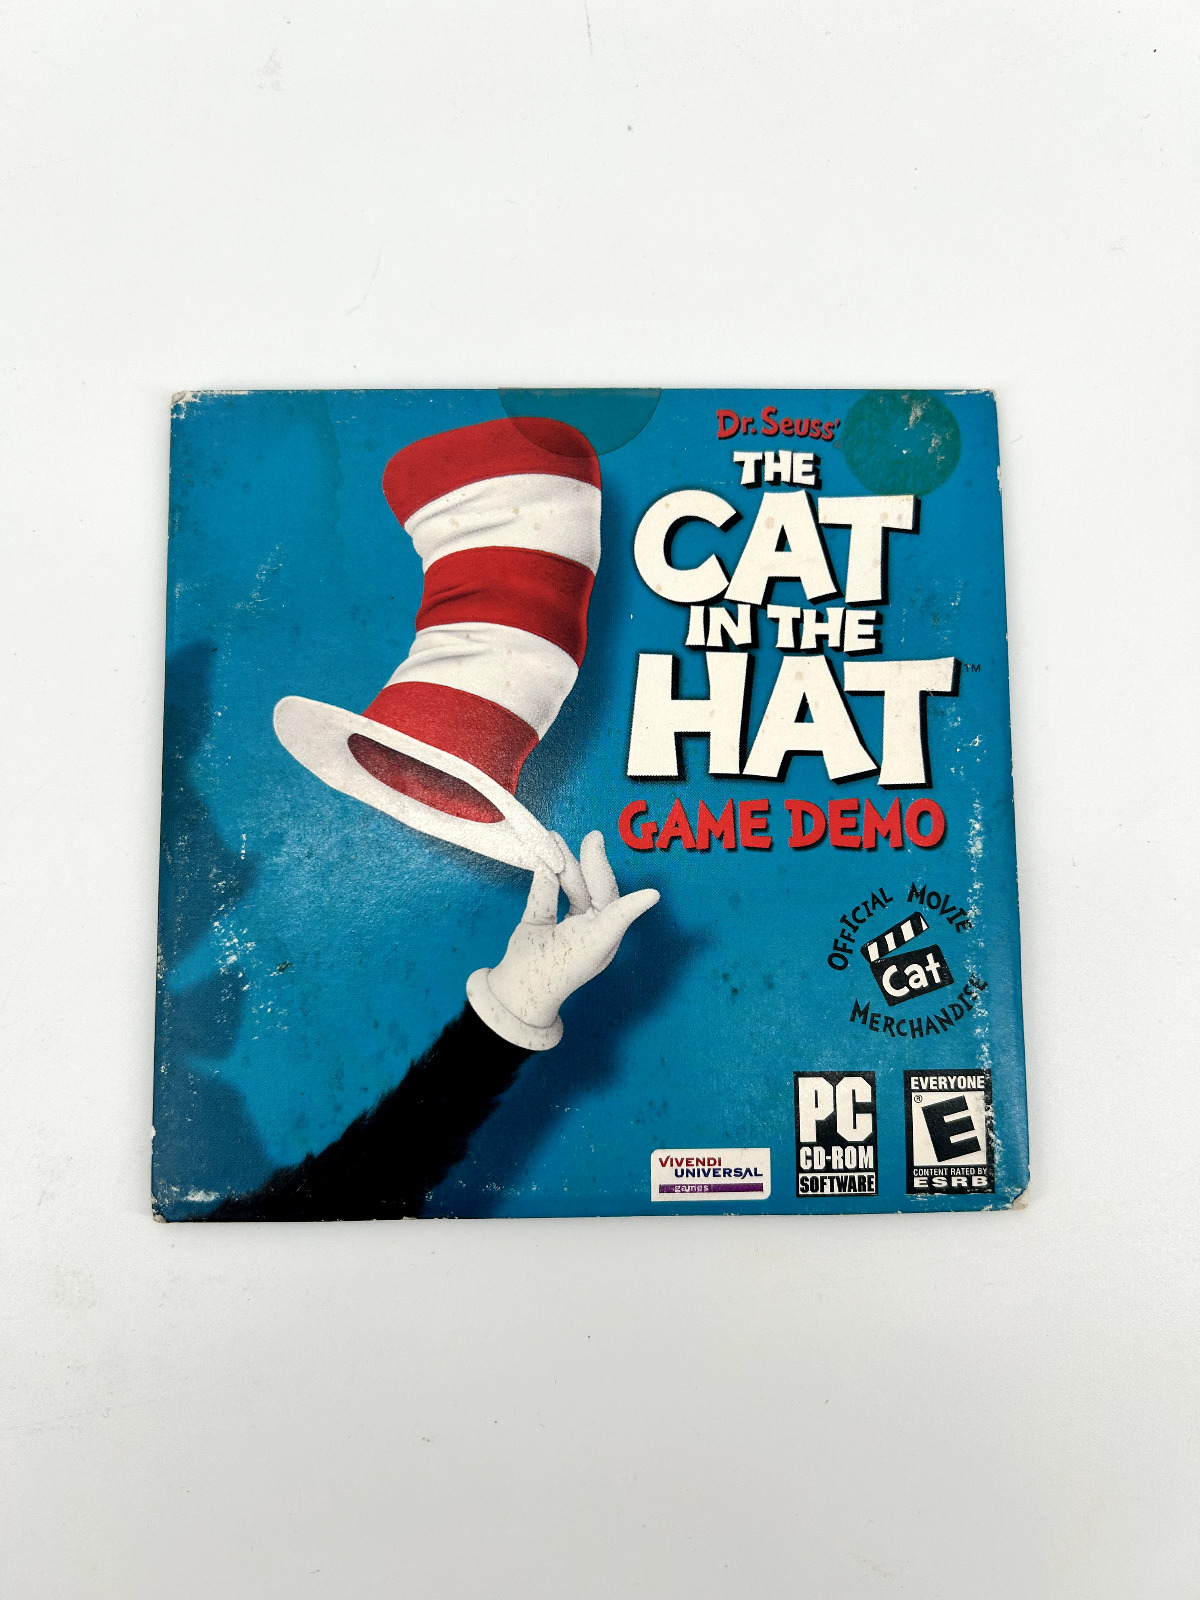 Dr. Seuss The Cat in the Hat - Windows PC CD-ROM Game 2002 Rare Demo Disc 